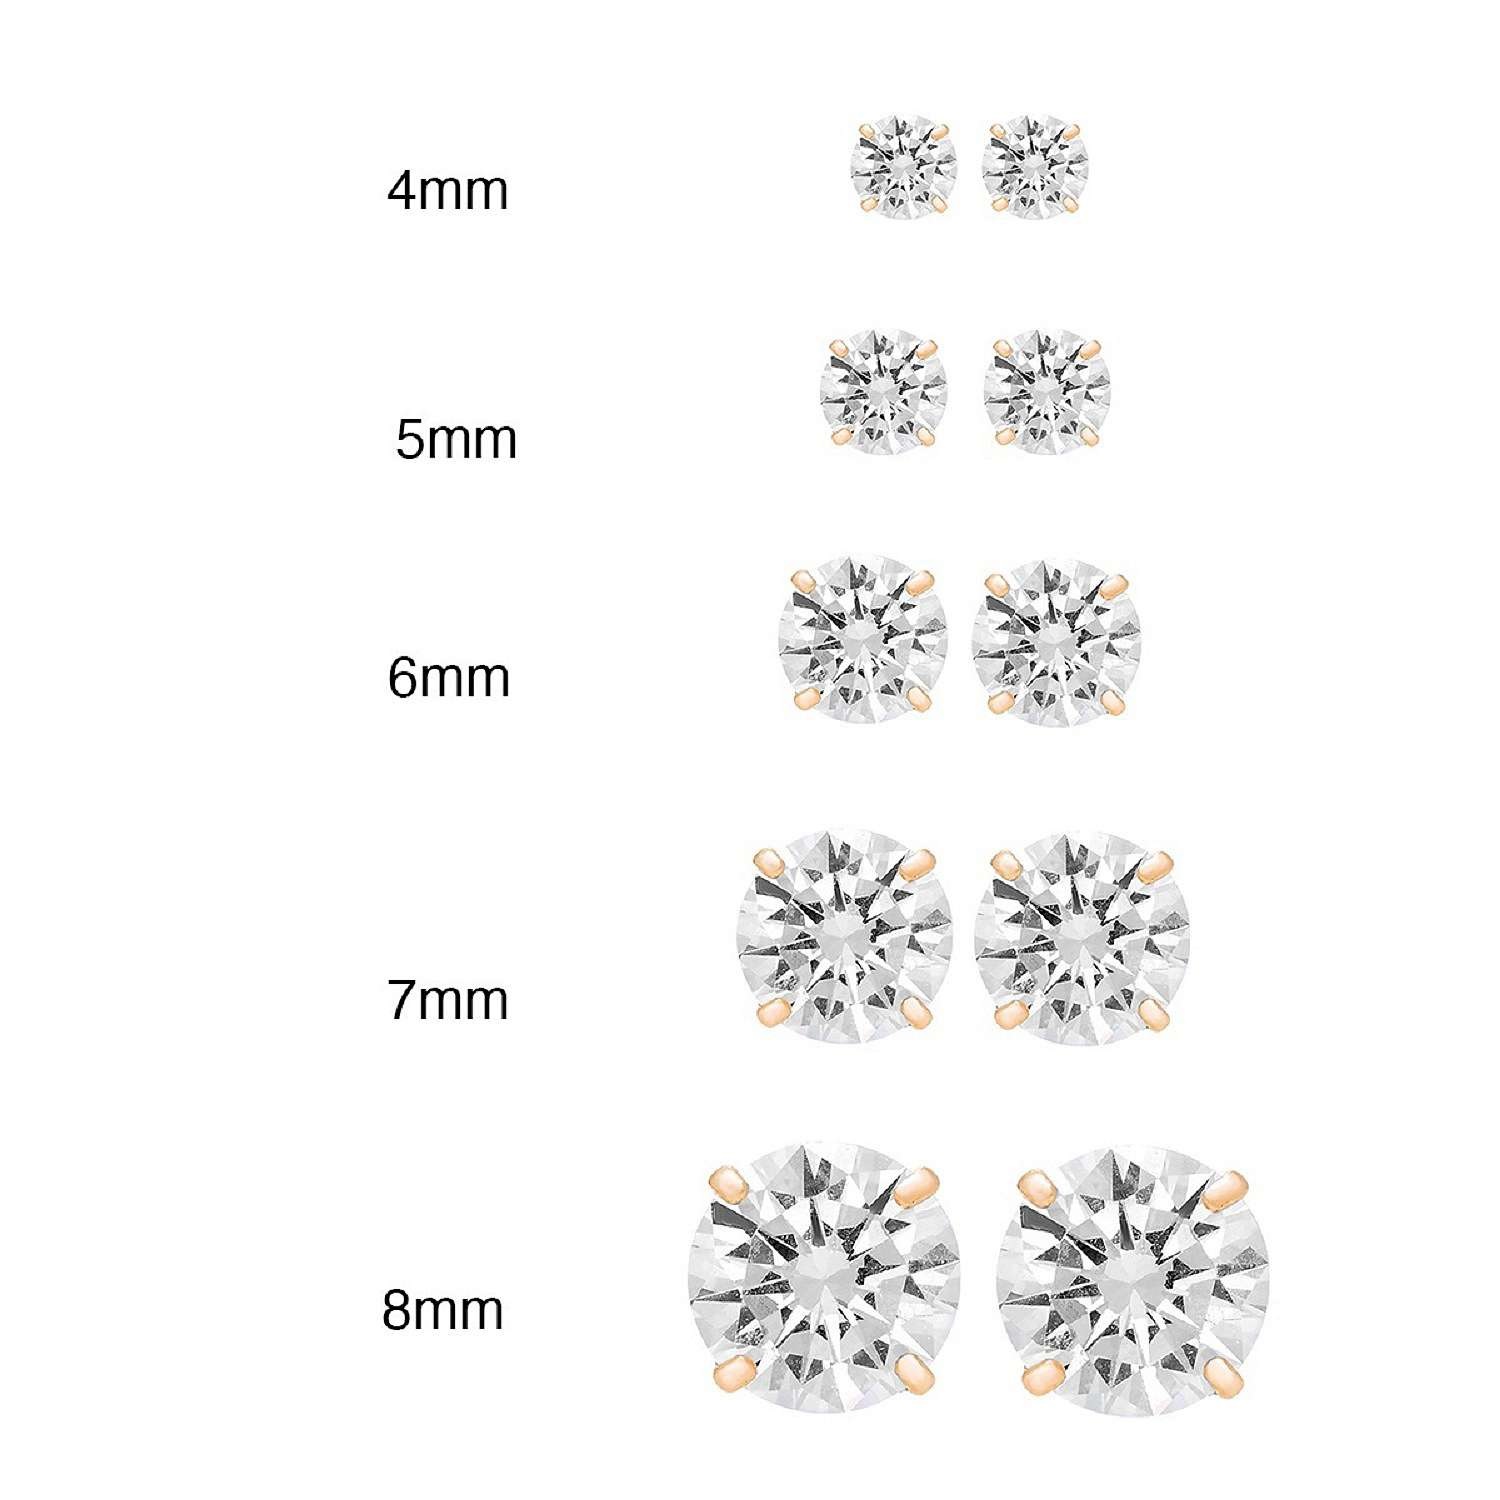 A&M 14k Gold 4mm to 8mm Round Clear CZ Stud Earrings, for Women, Girls, Unisex - image 2 of 3